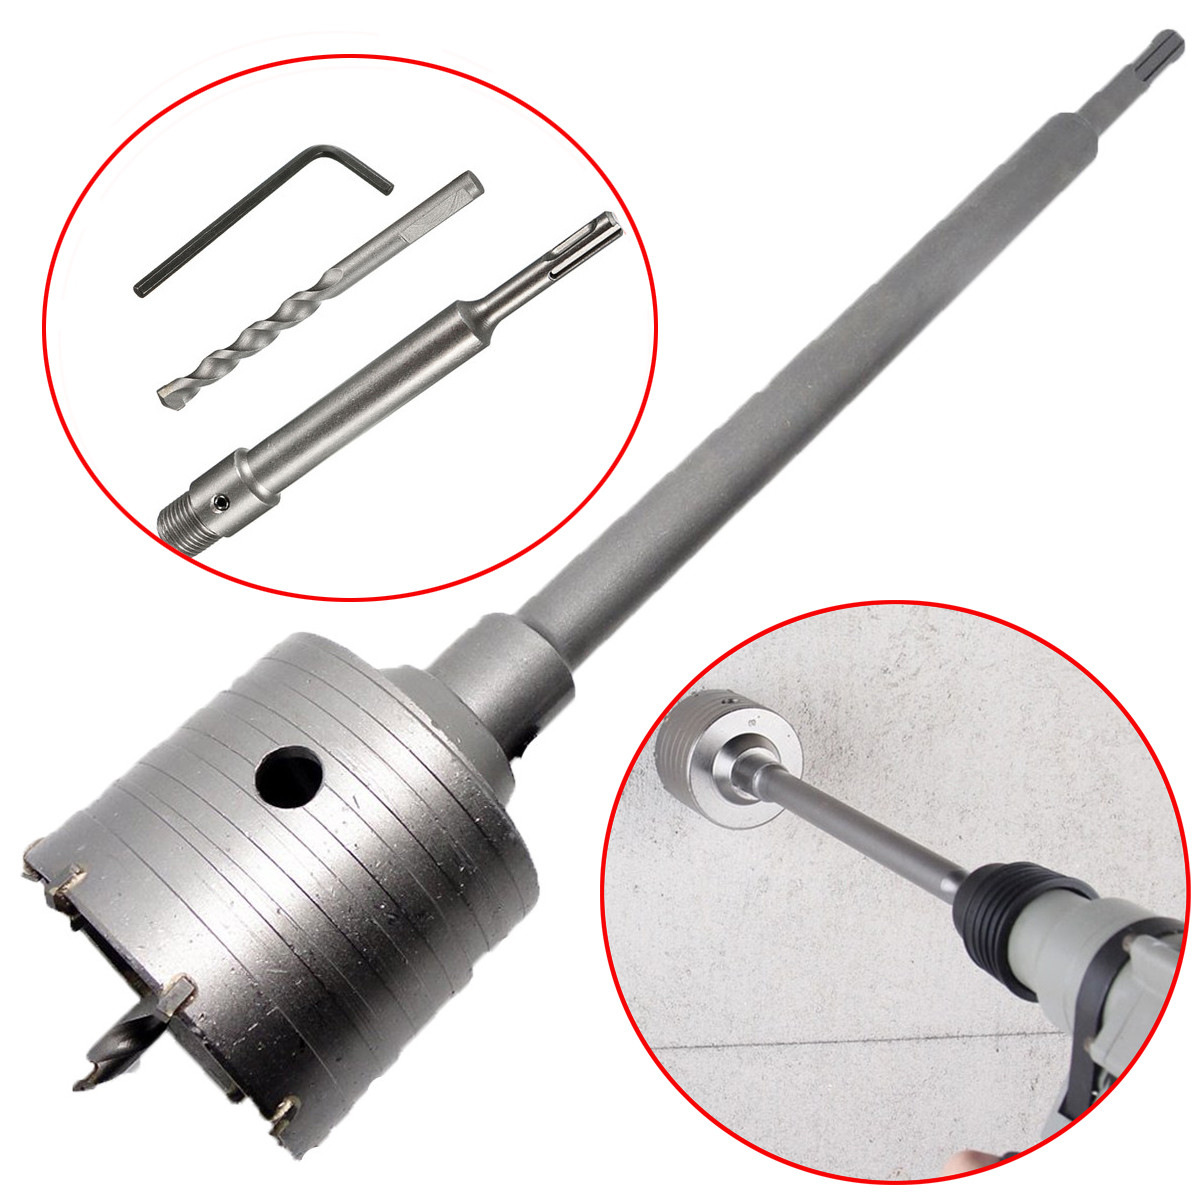 Concrete Hole Saw Electric Hollow Core Drill Bit Shank Cement Stone Wall Air Conditioner Alloy Match yourself